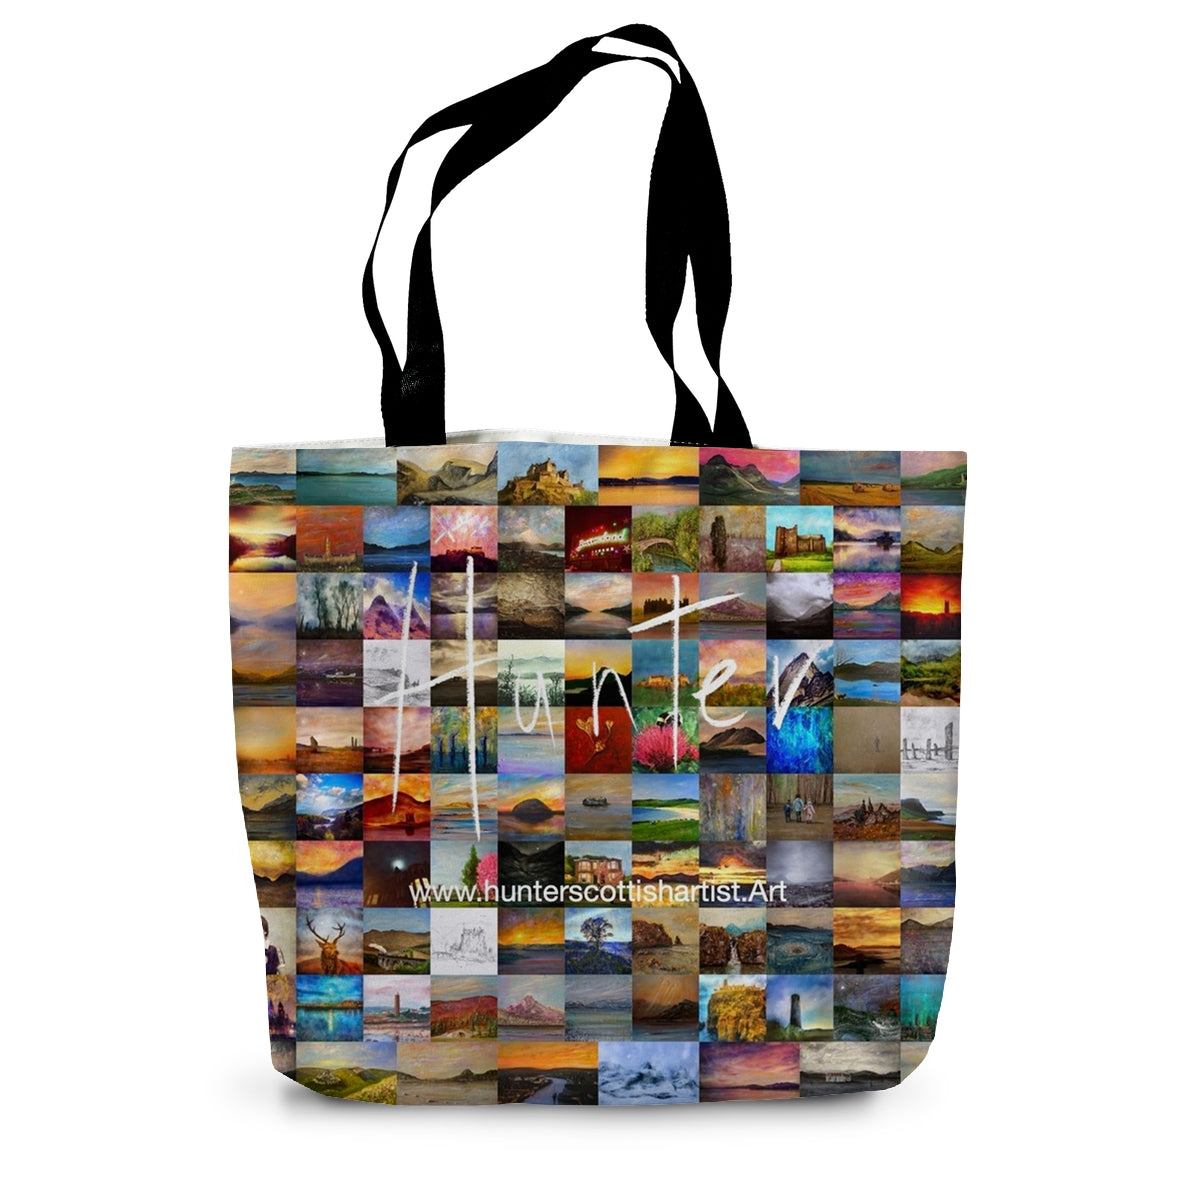 Gourock Golf Club Sunset Art Gifts Canvas Tote Bag-Bags-River Clyde Art Gallery-14"x18.5"-Paintings, Prints, Homeware, Art Gifts From Scotland By Scottish Artist Kevin Hunter